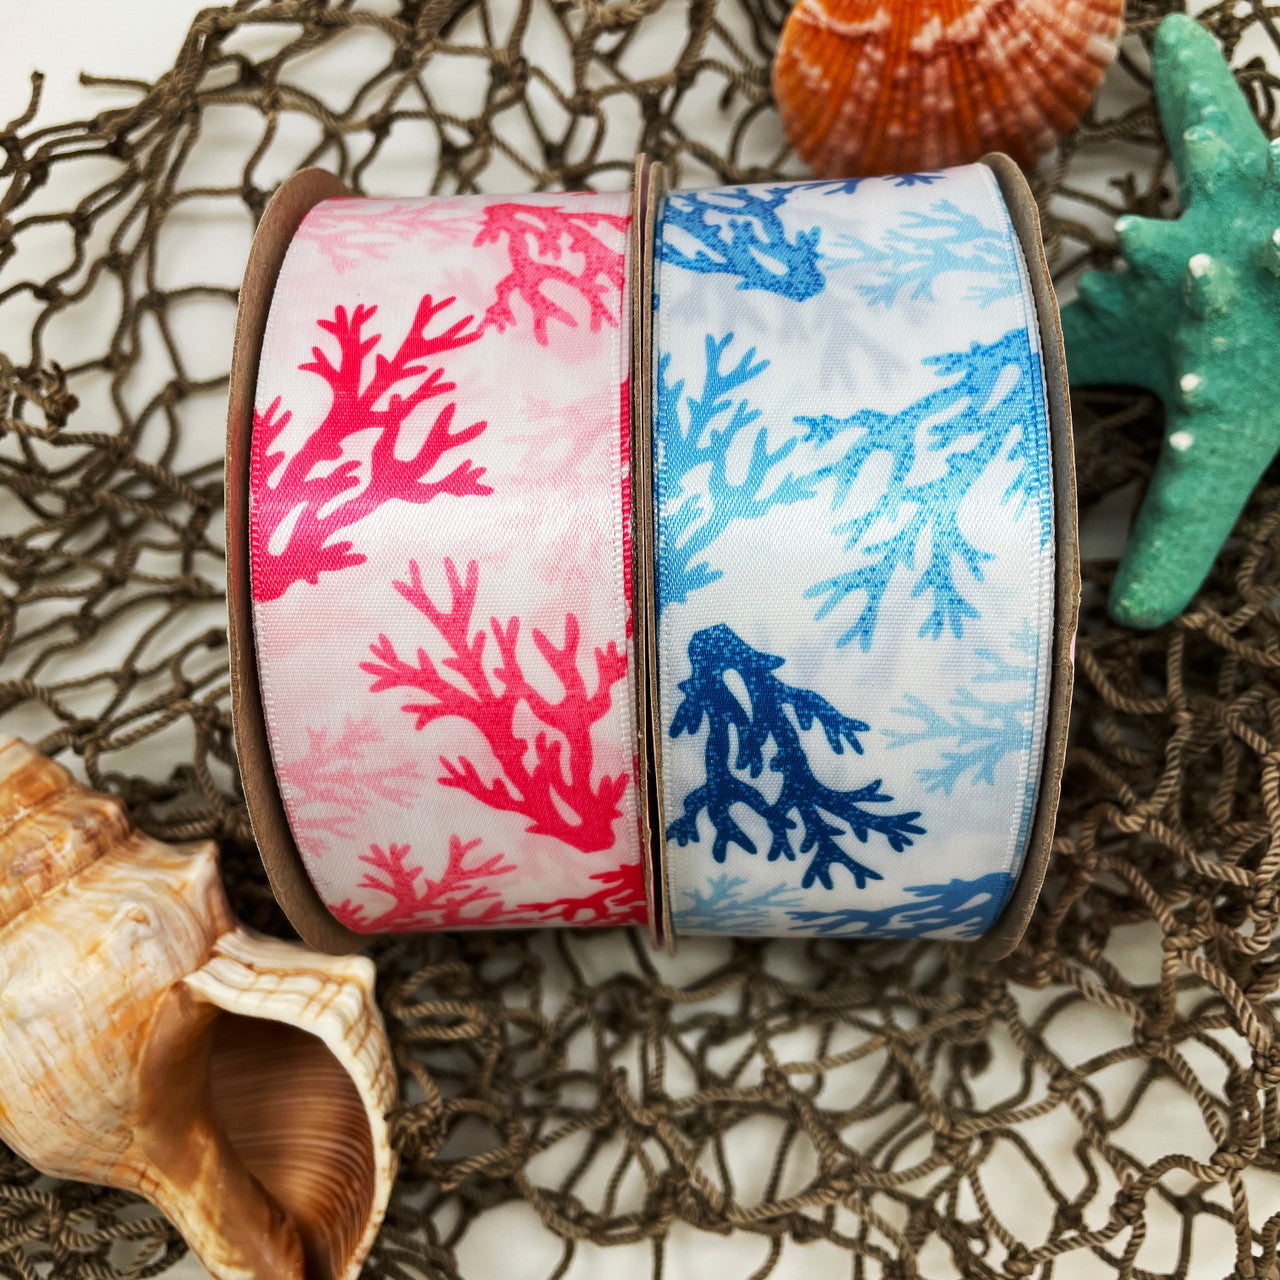 Our coral reef ribbon is offered in two colors!